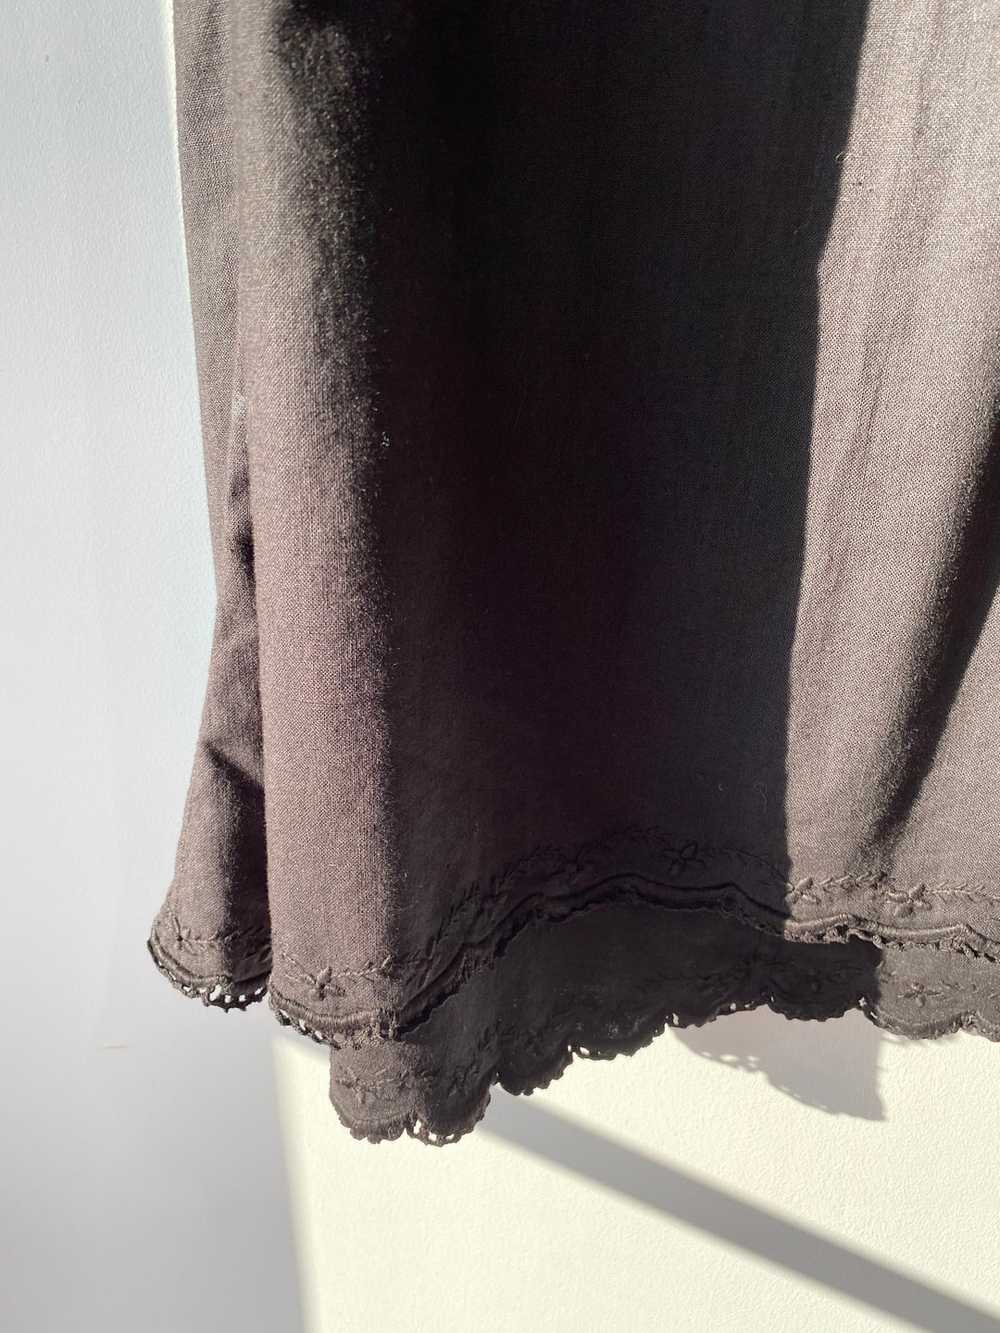 Vintage Overdyed Victorian Skirt with Lace - image 2